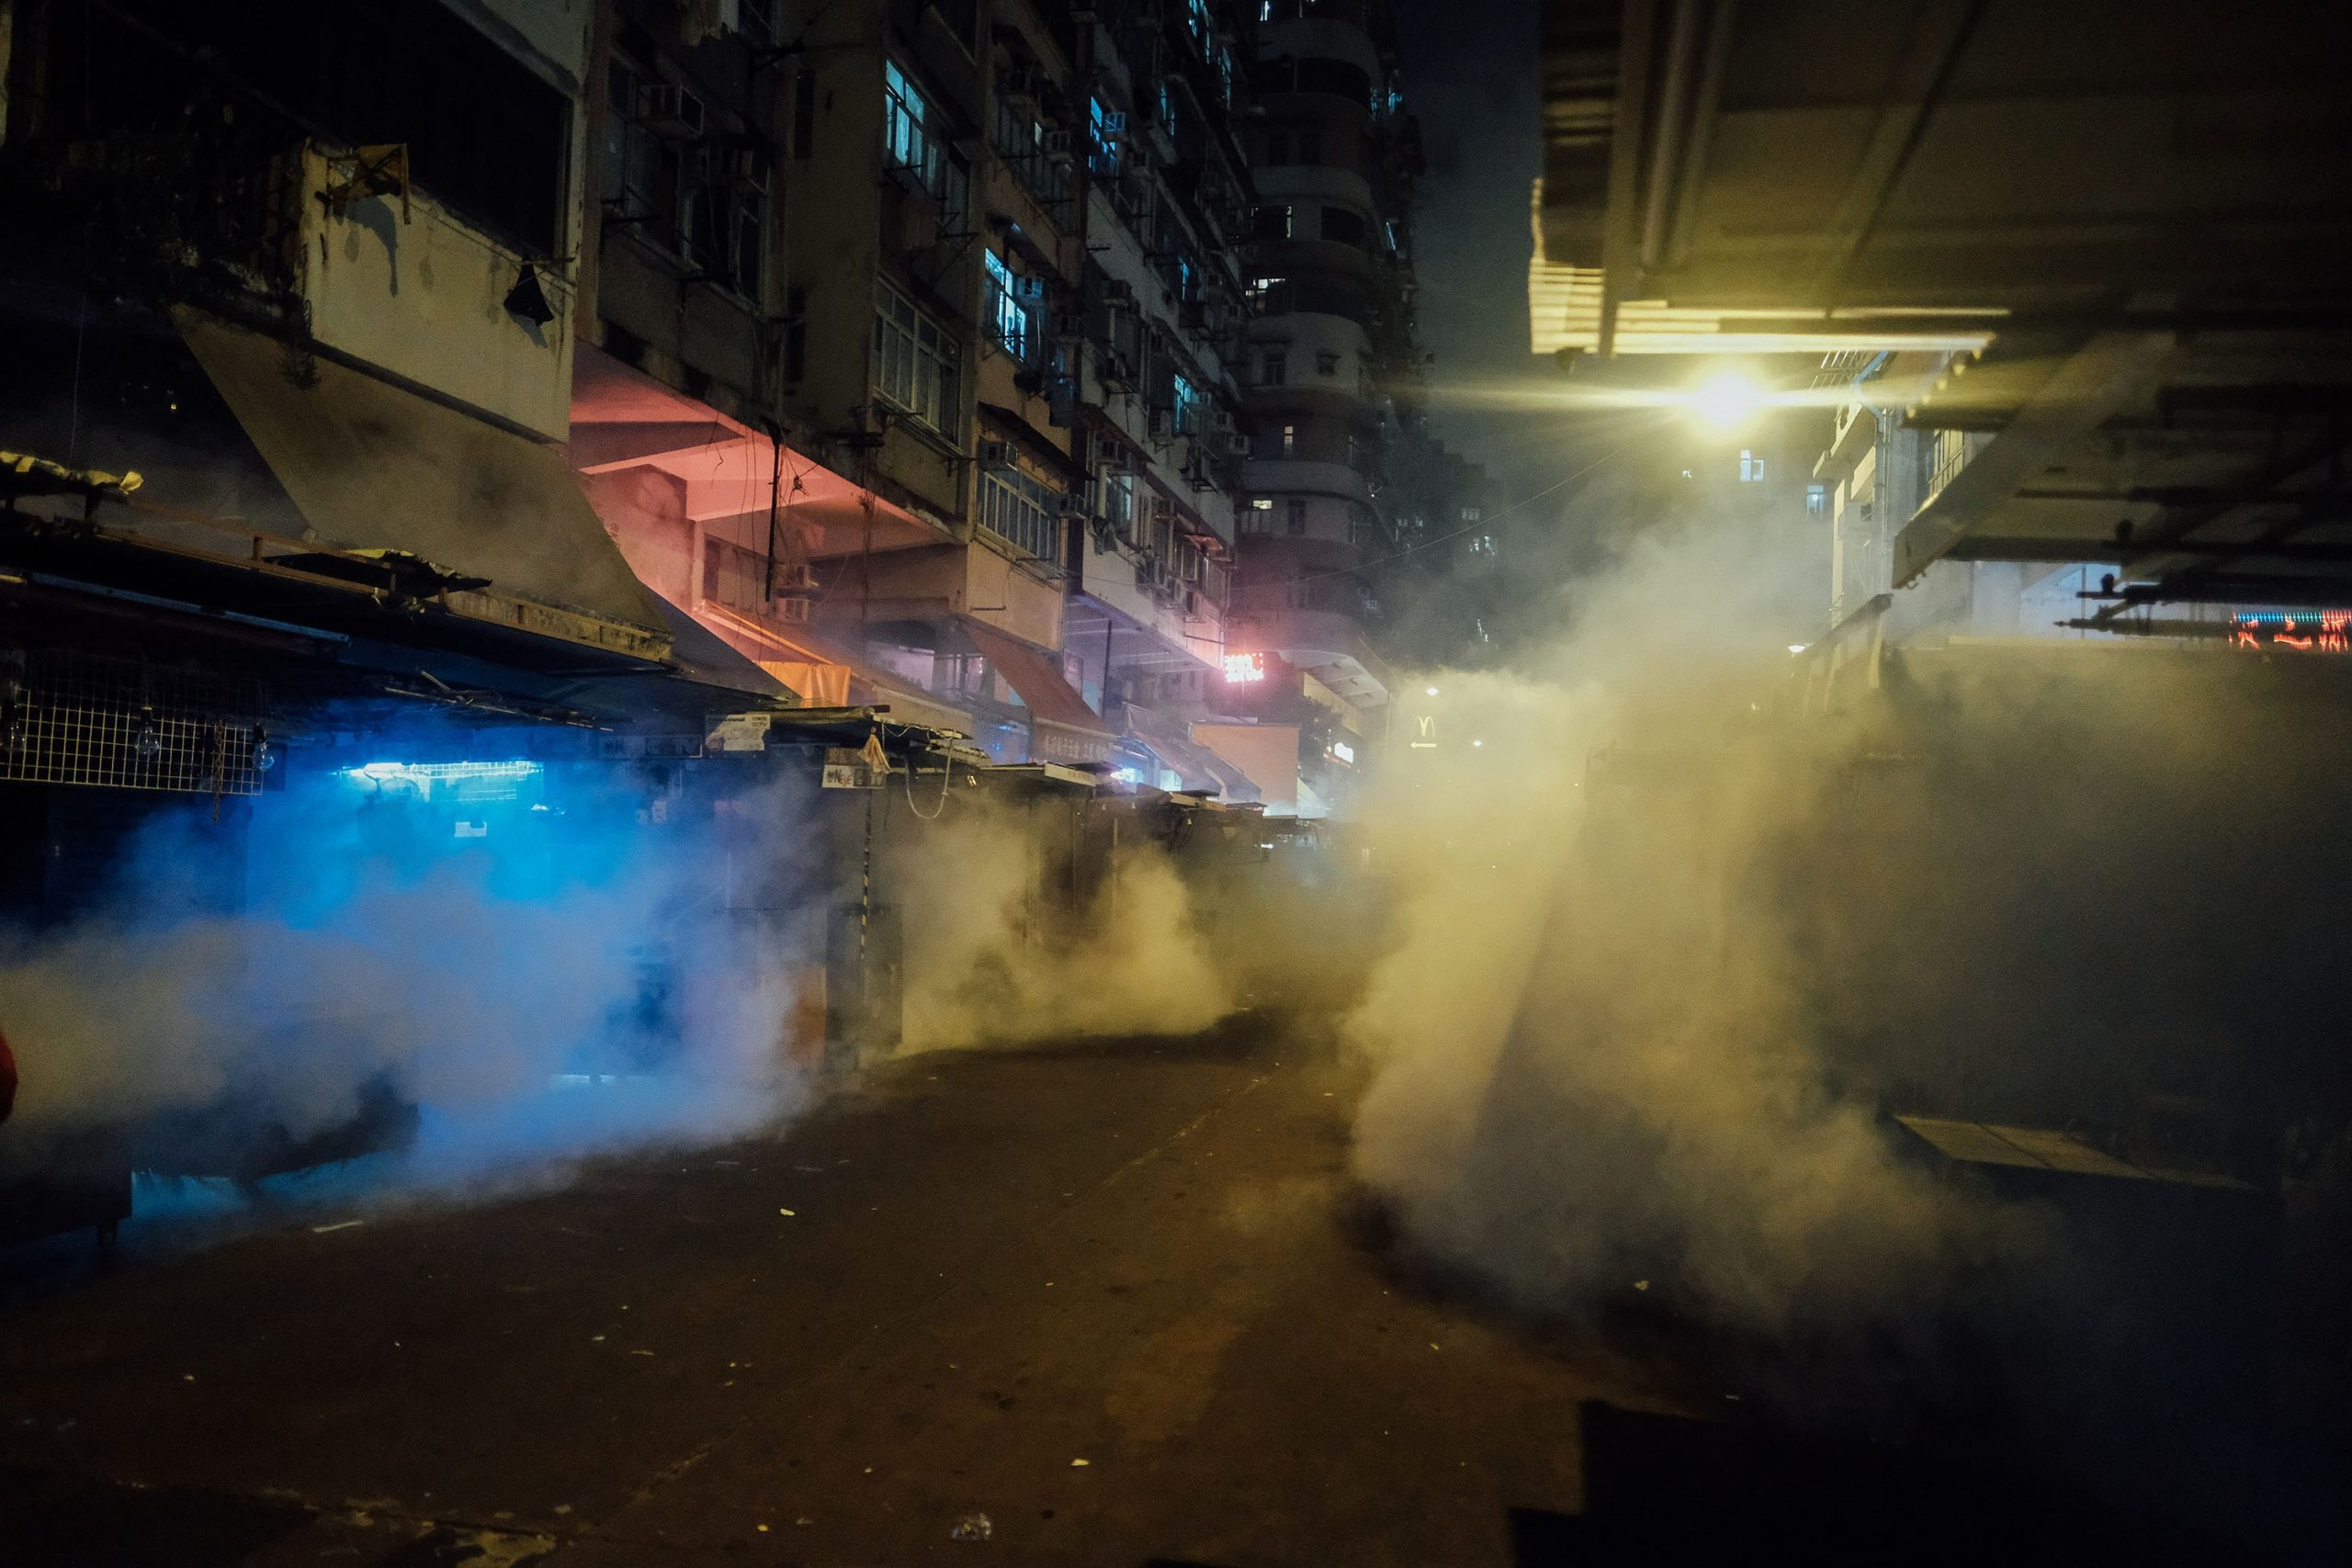 “FOCUS AT THE FRONTLINE 2019” PHOTO CONTEST - Hong Kong Press Photographers Association 2